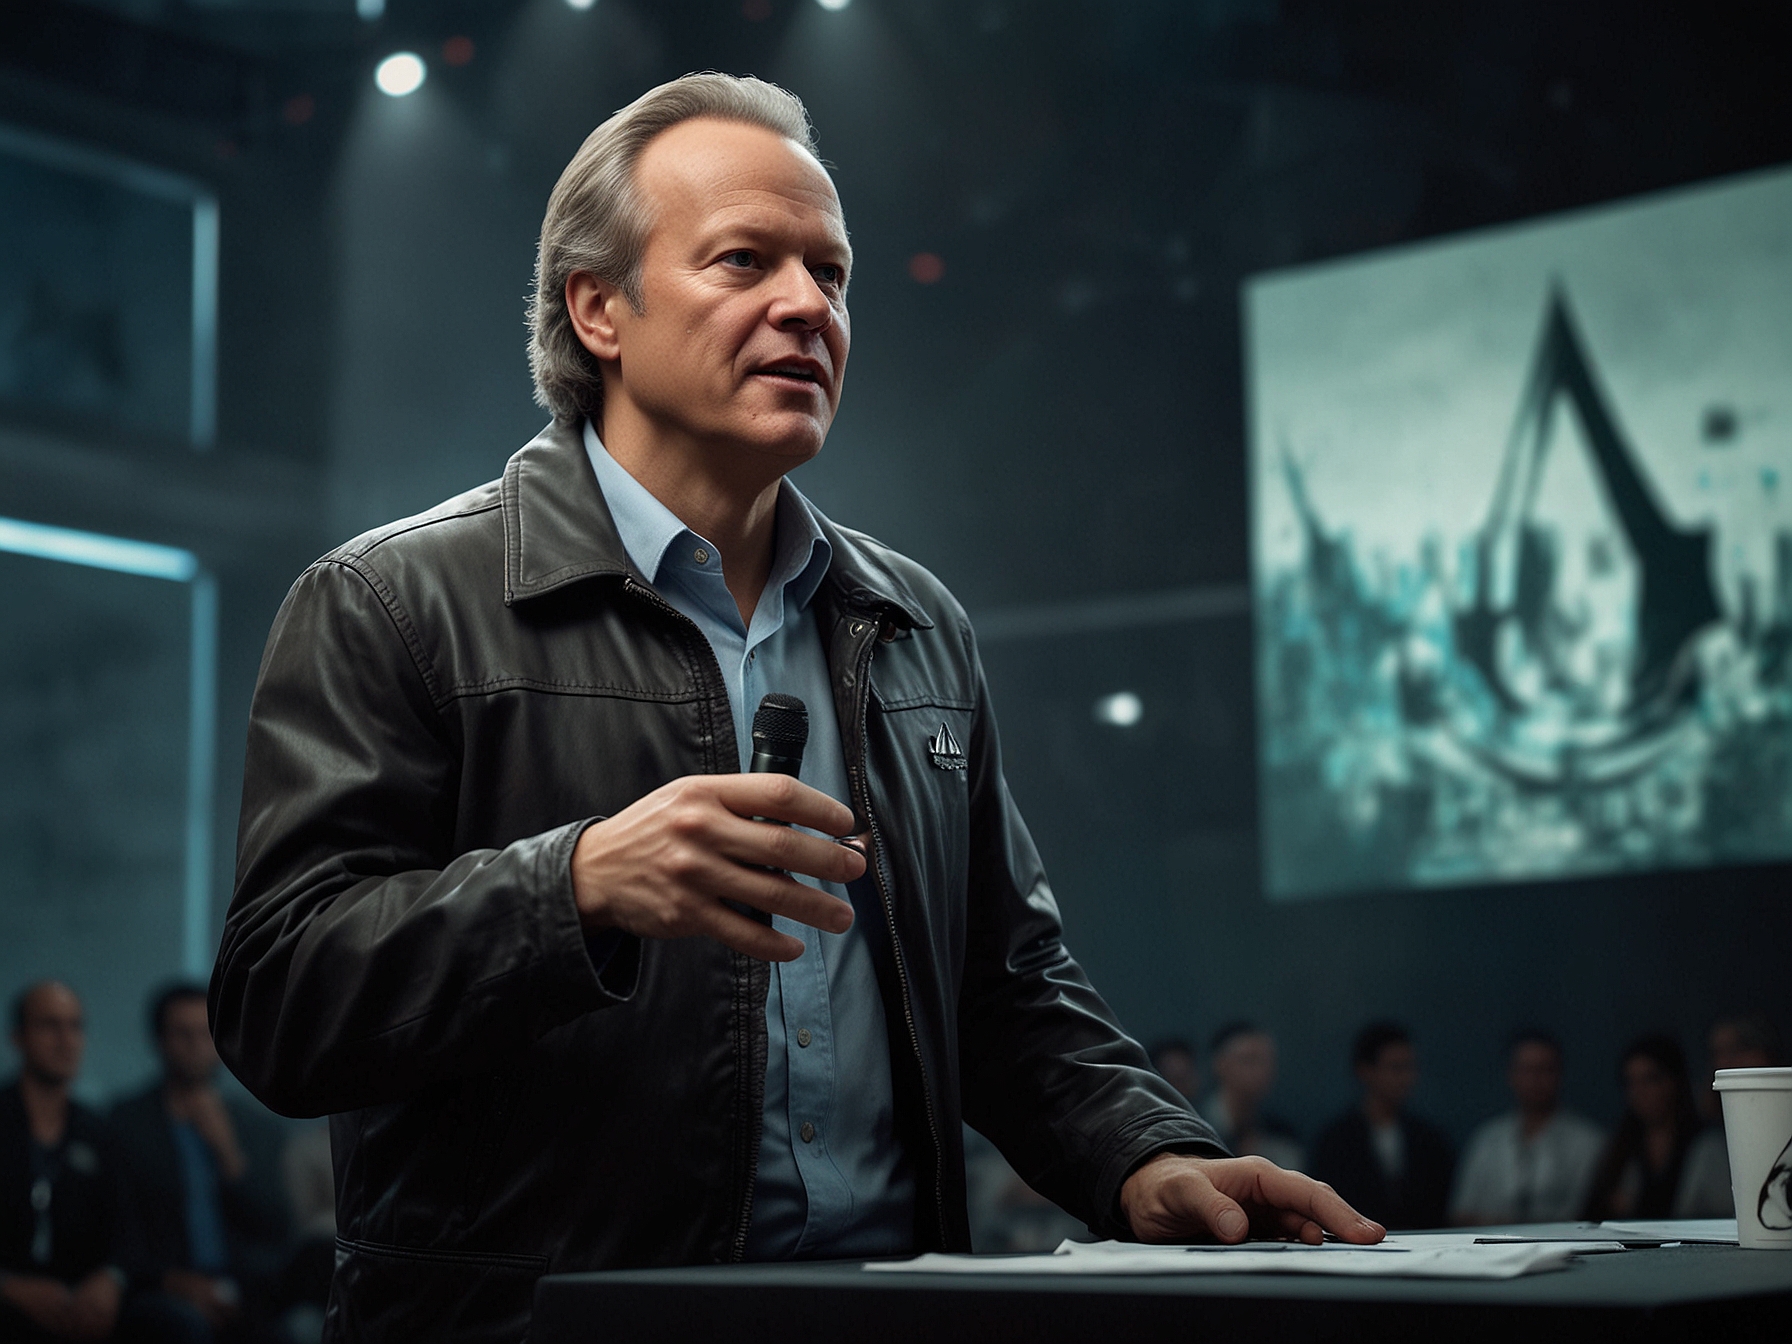 An image of Yves Guillemot speaking at a gaming convention, with the Assassin’s Creed logo in the background, symbolizing the official announcement of upcoming games in the series.